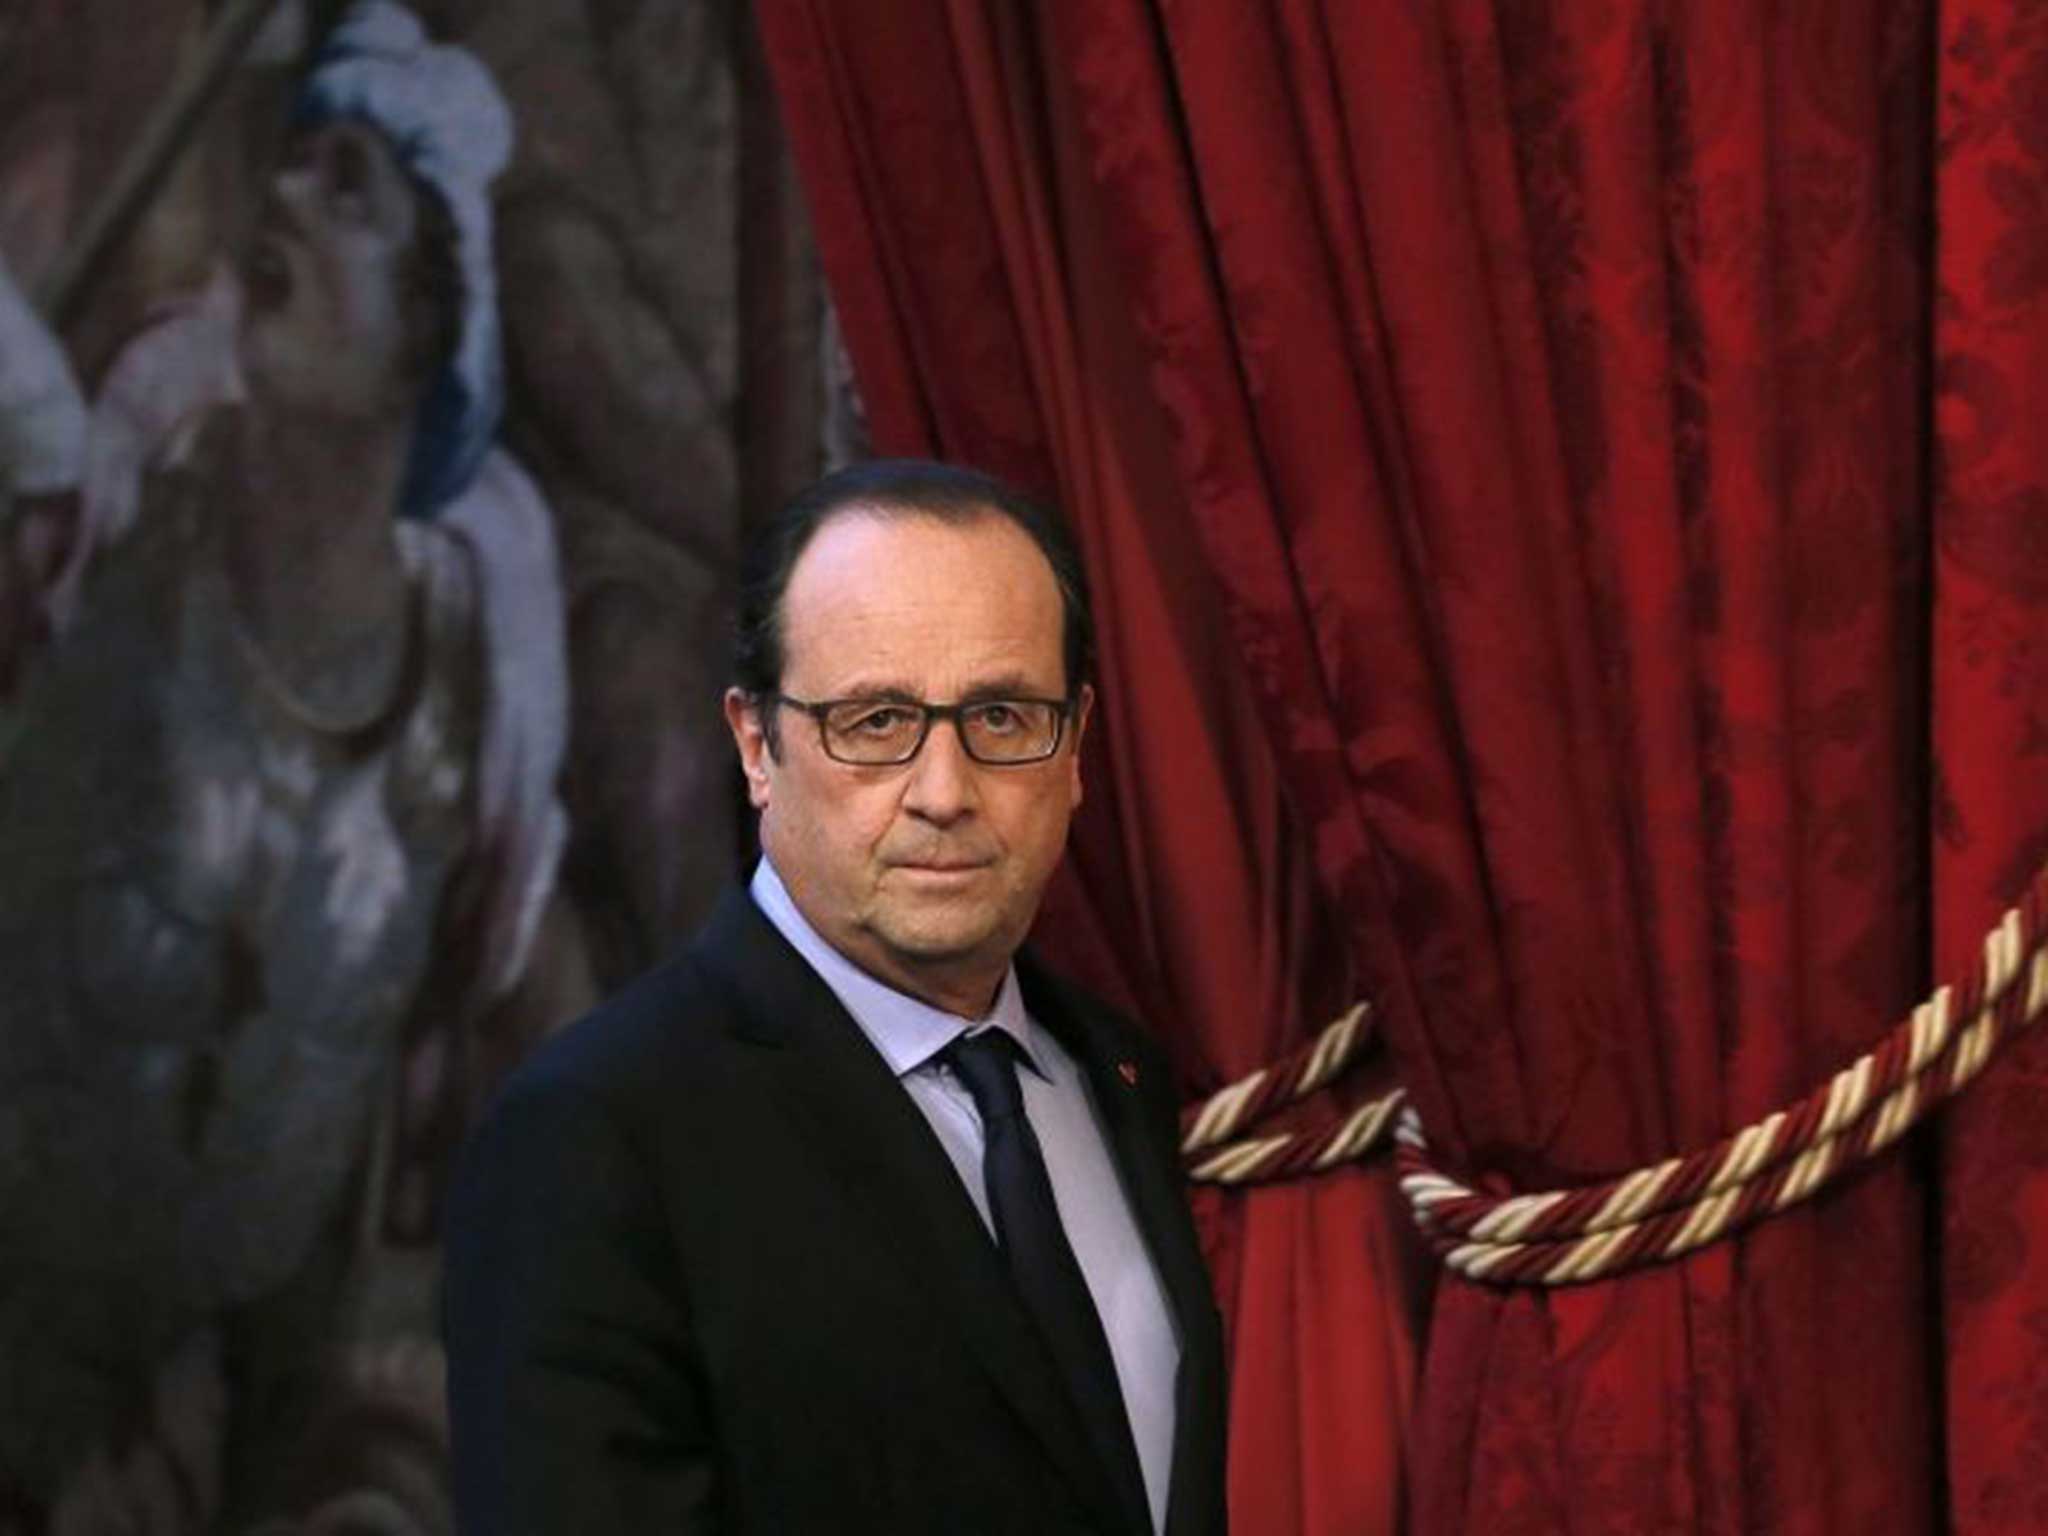 President Hollande said that the final text should be “balanced and reasonable”